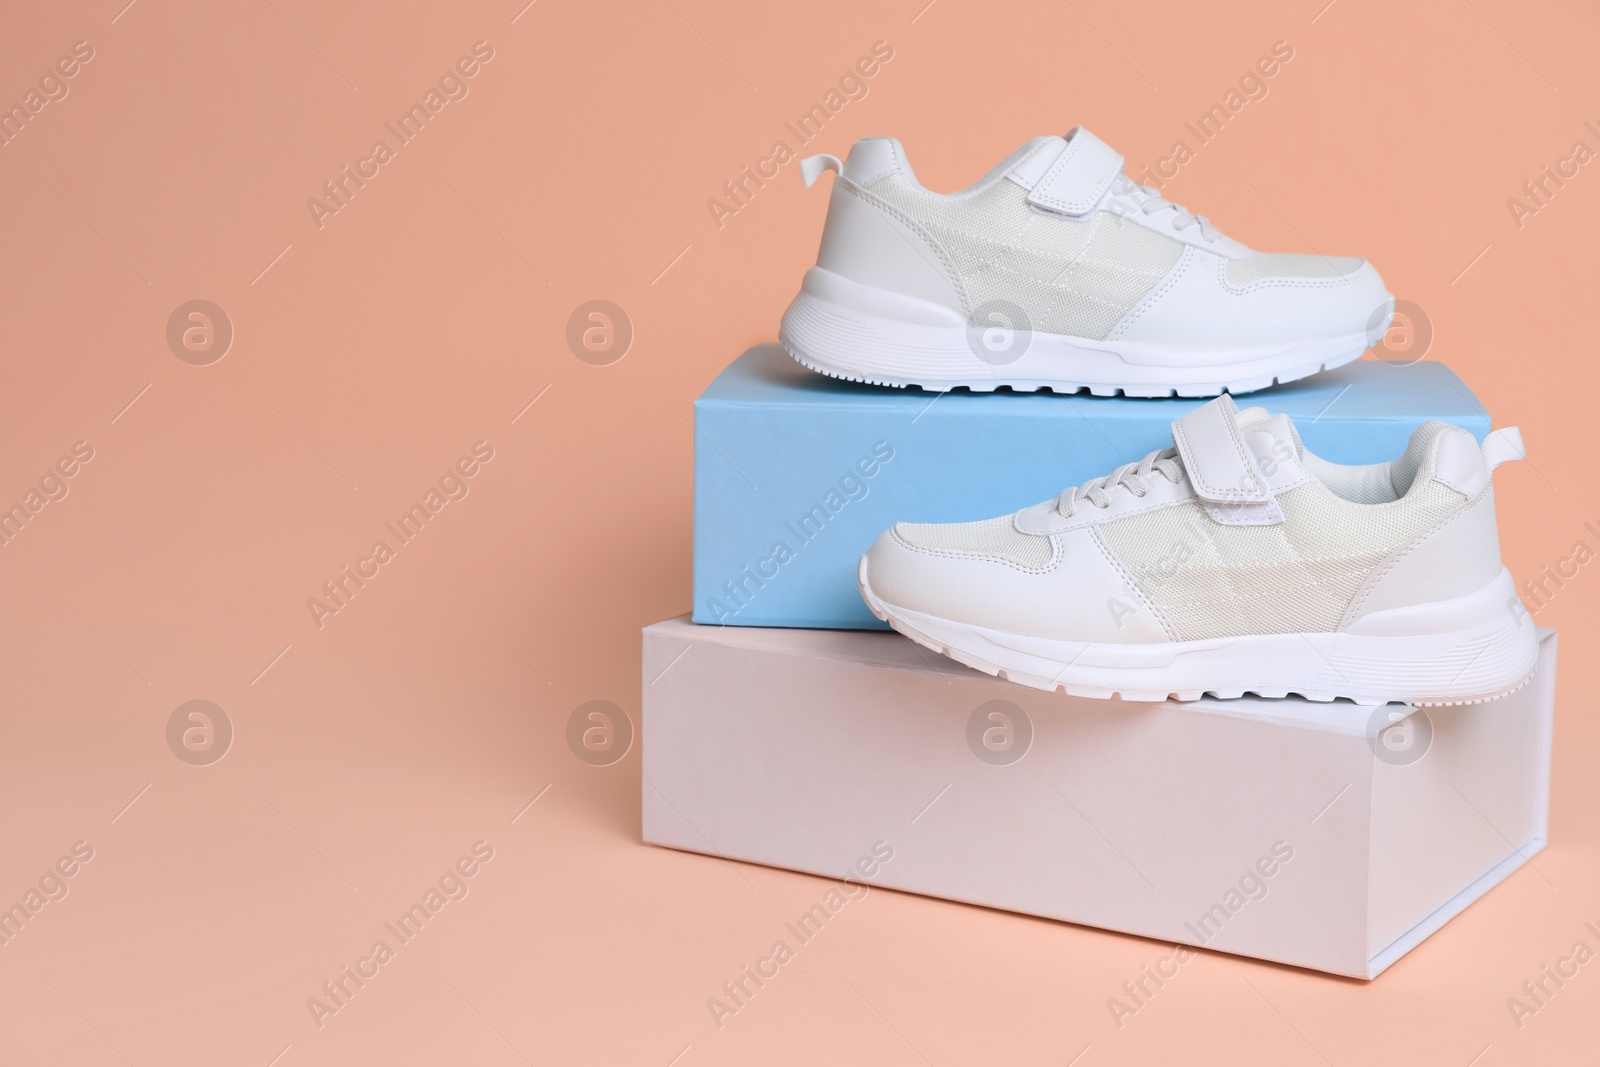 Photo of Pair of comfortable sports shoes and boxes on pale coral background. Space for text